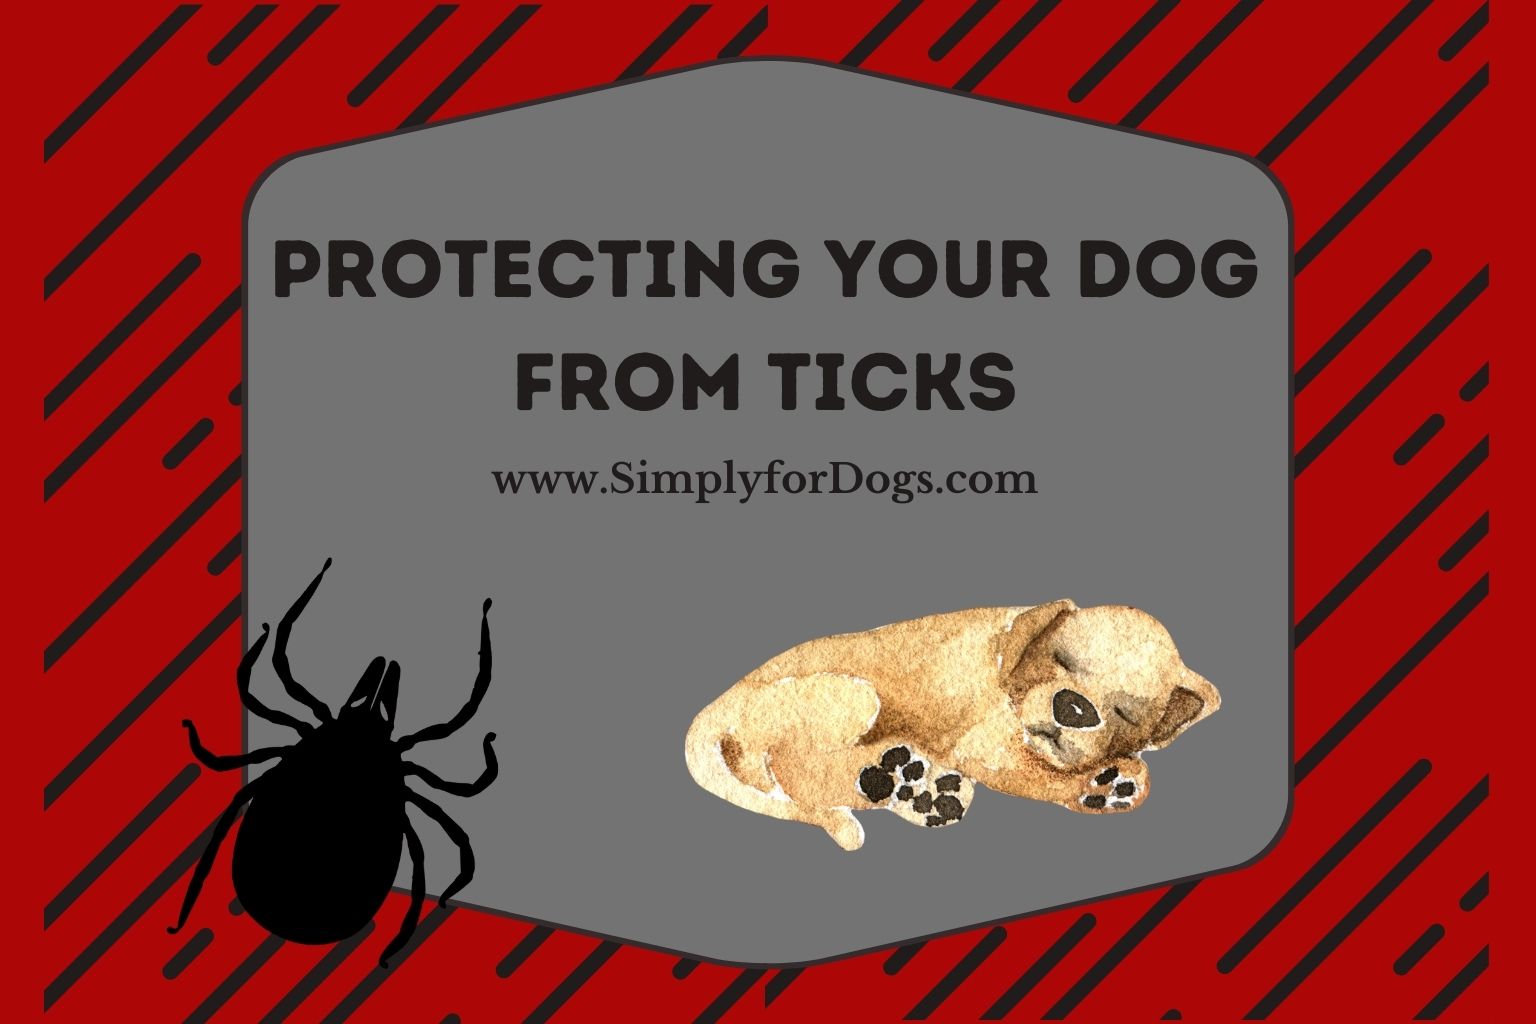 Protecting Your Dog from Ticks